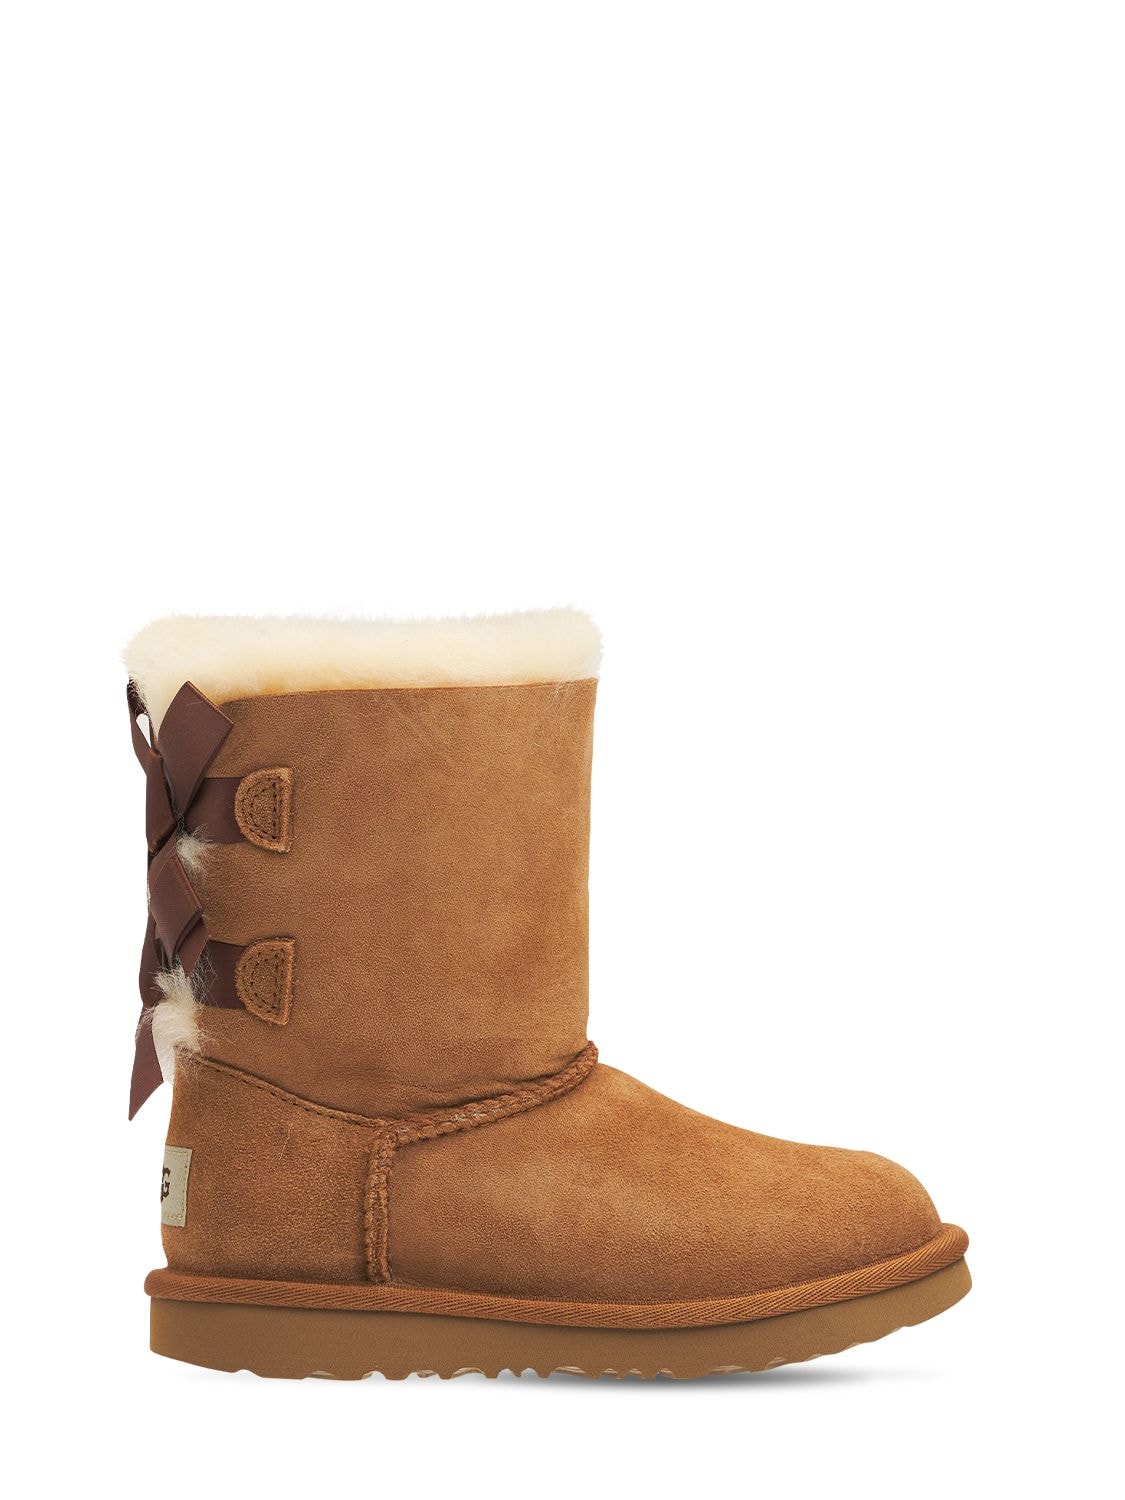 Bailey Bow Shearling Boots